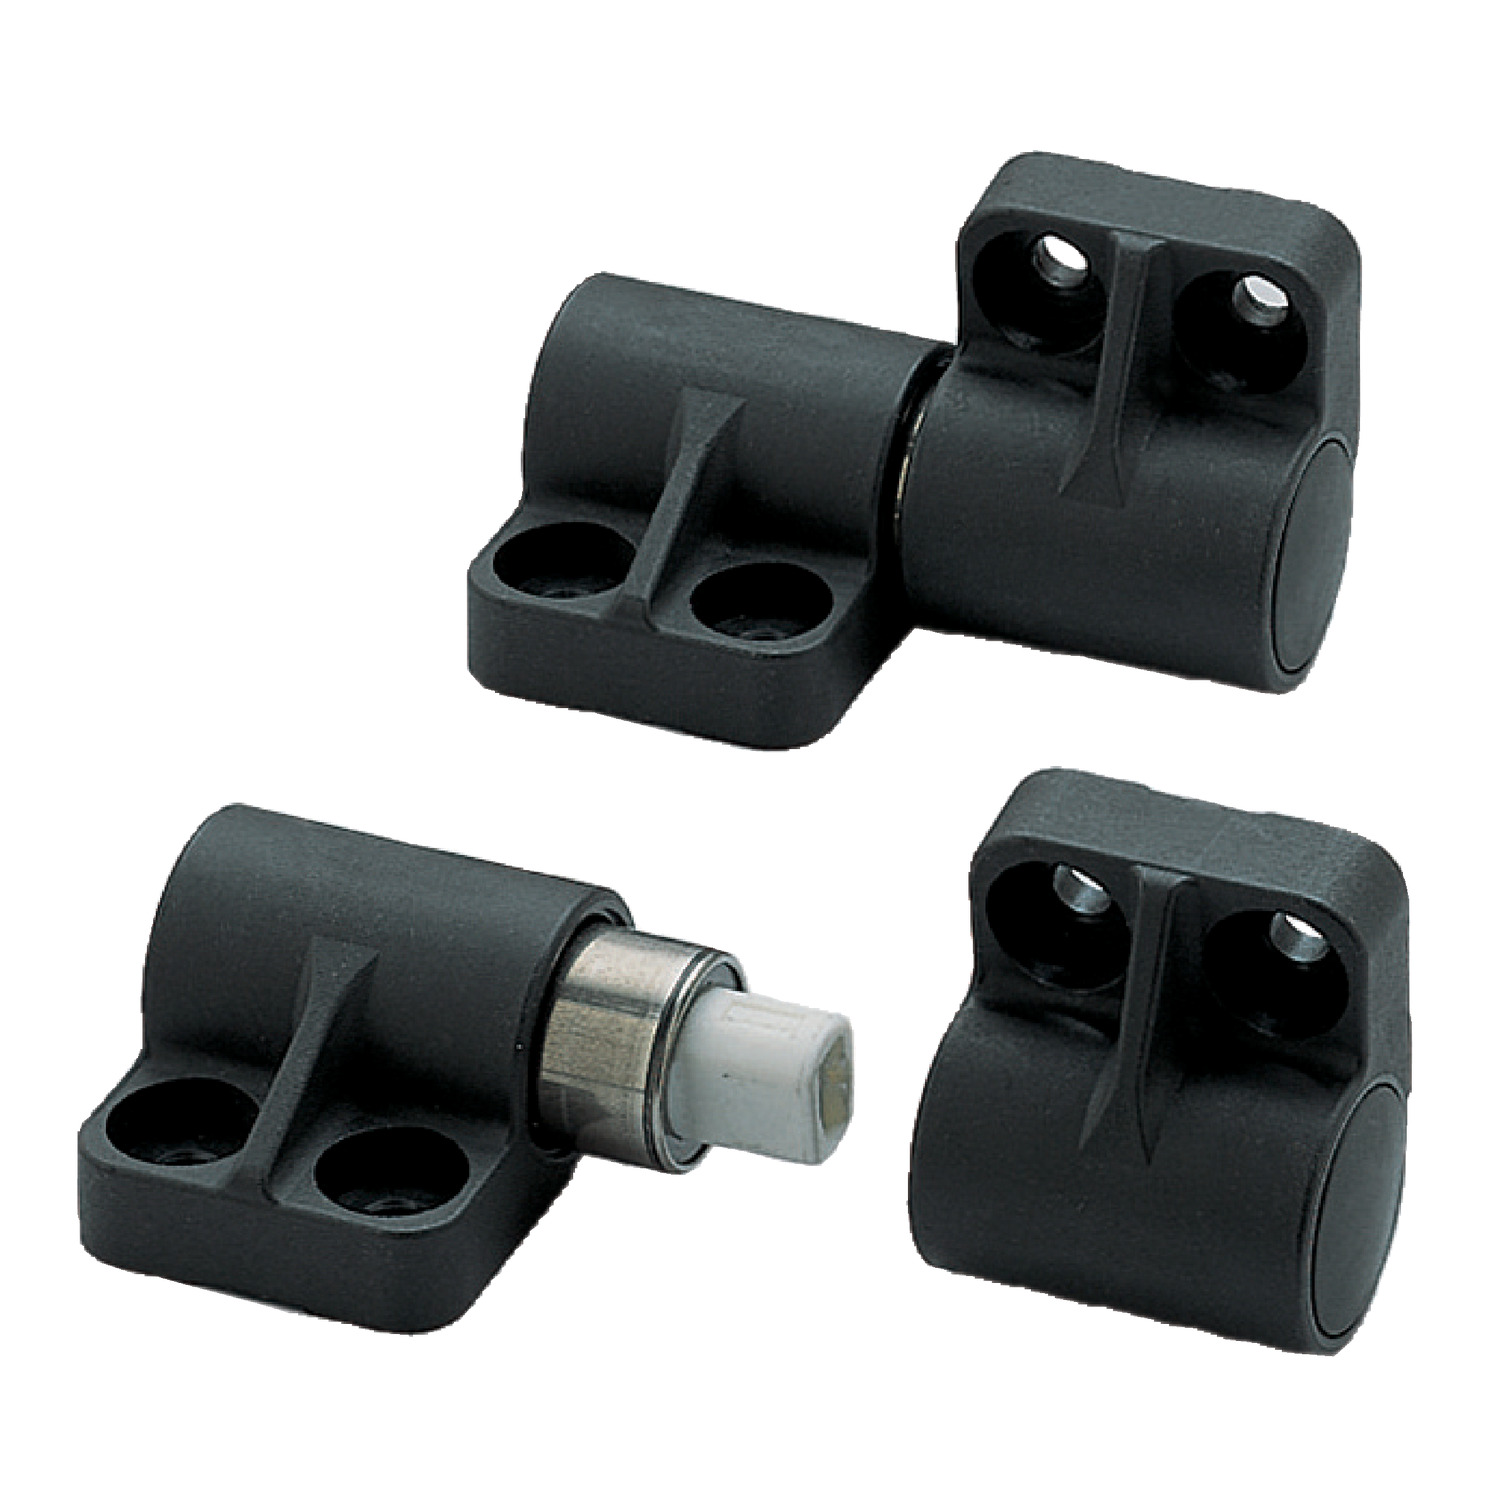 Soft Closing Hinge Set - Complete Complete soft closing hinge set with torque dampers. 115° operating angle.